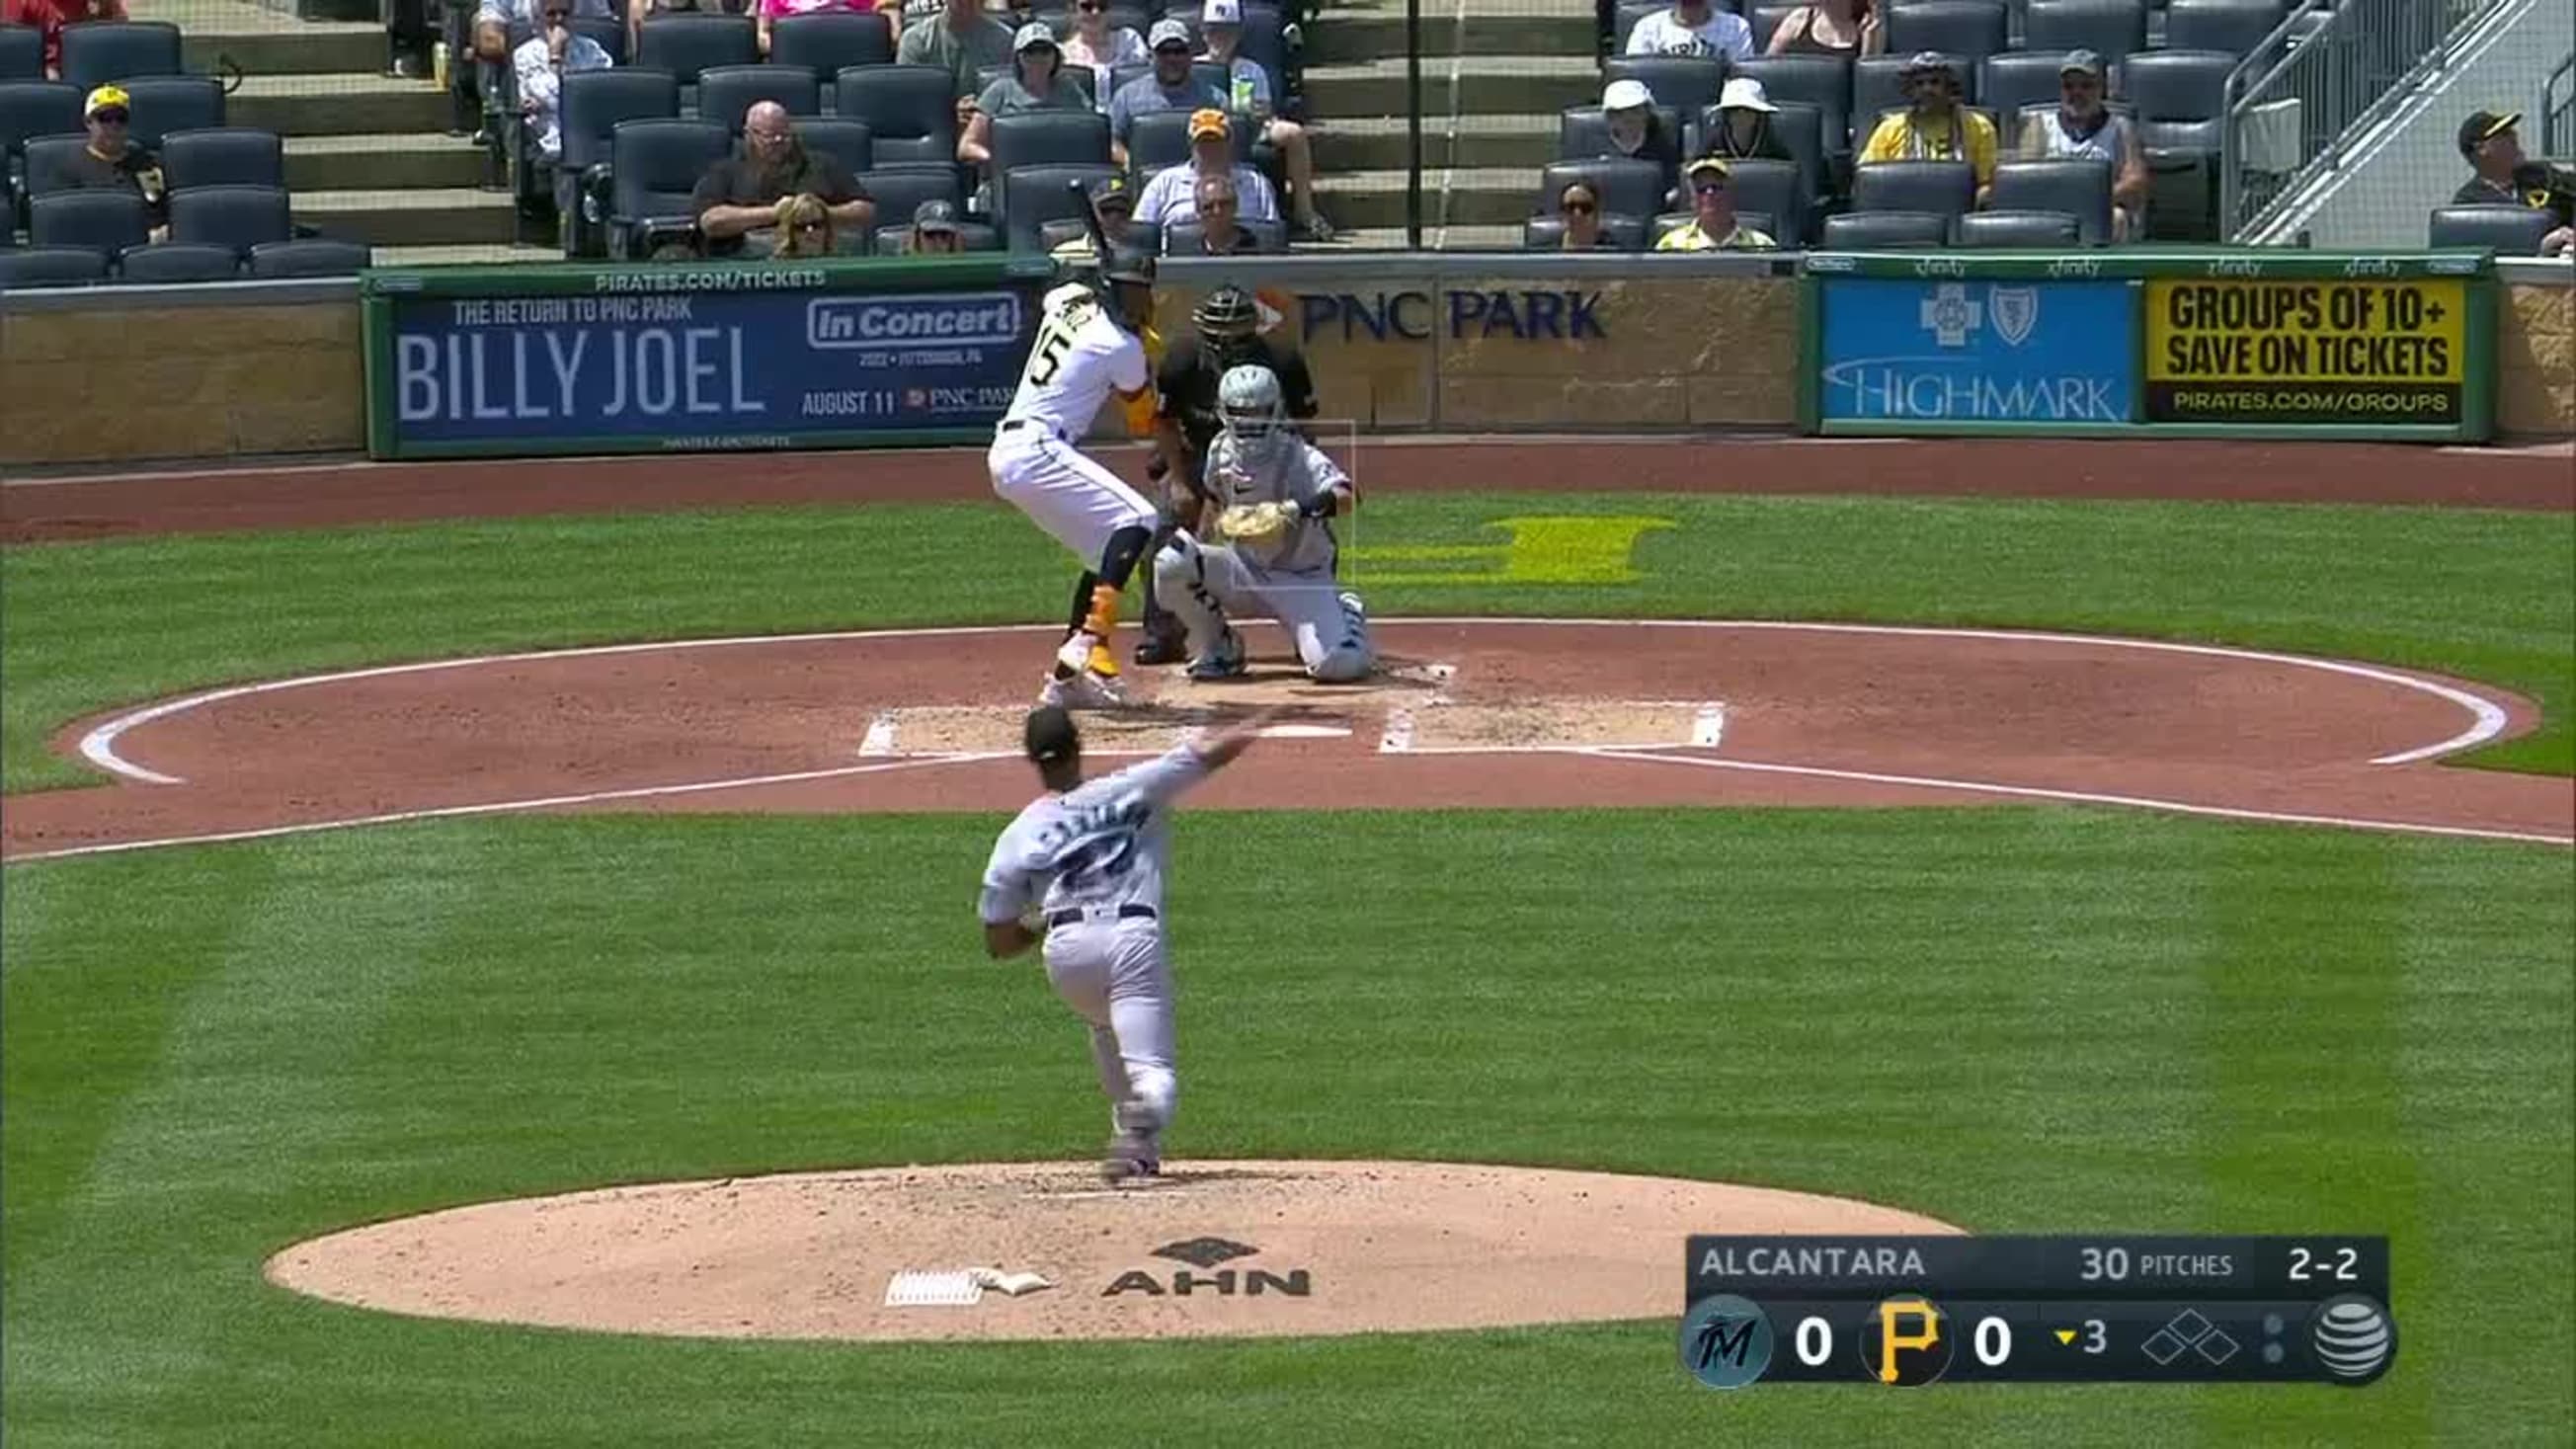 Oneil Cruz's 118 mph homer another Pirates record